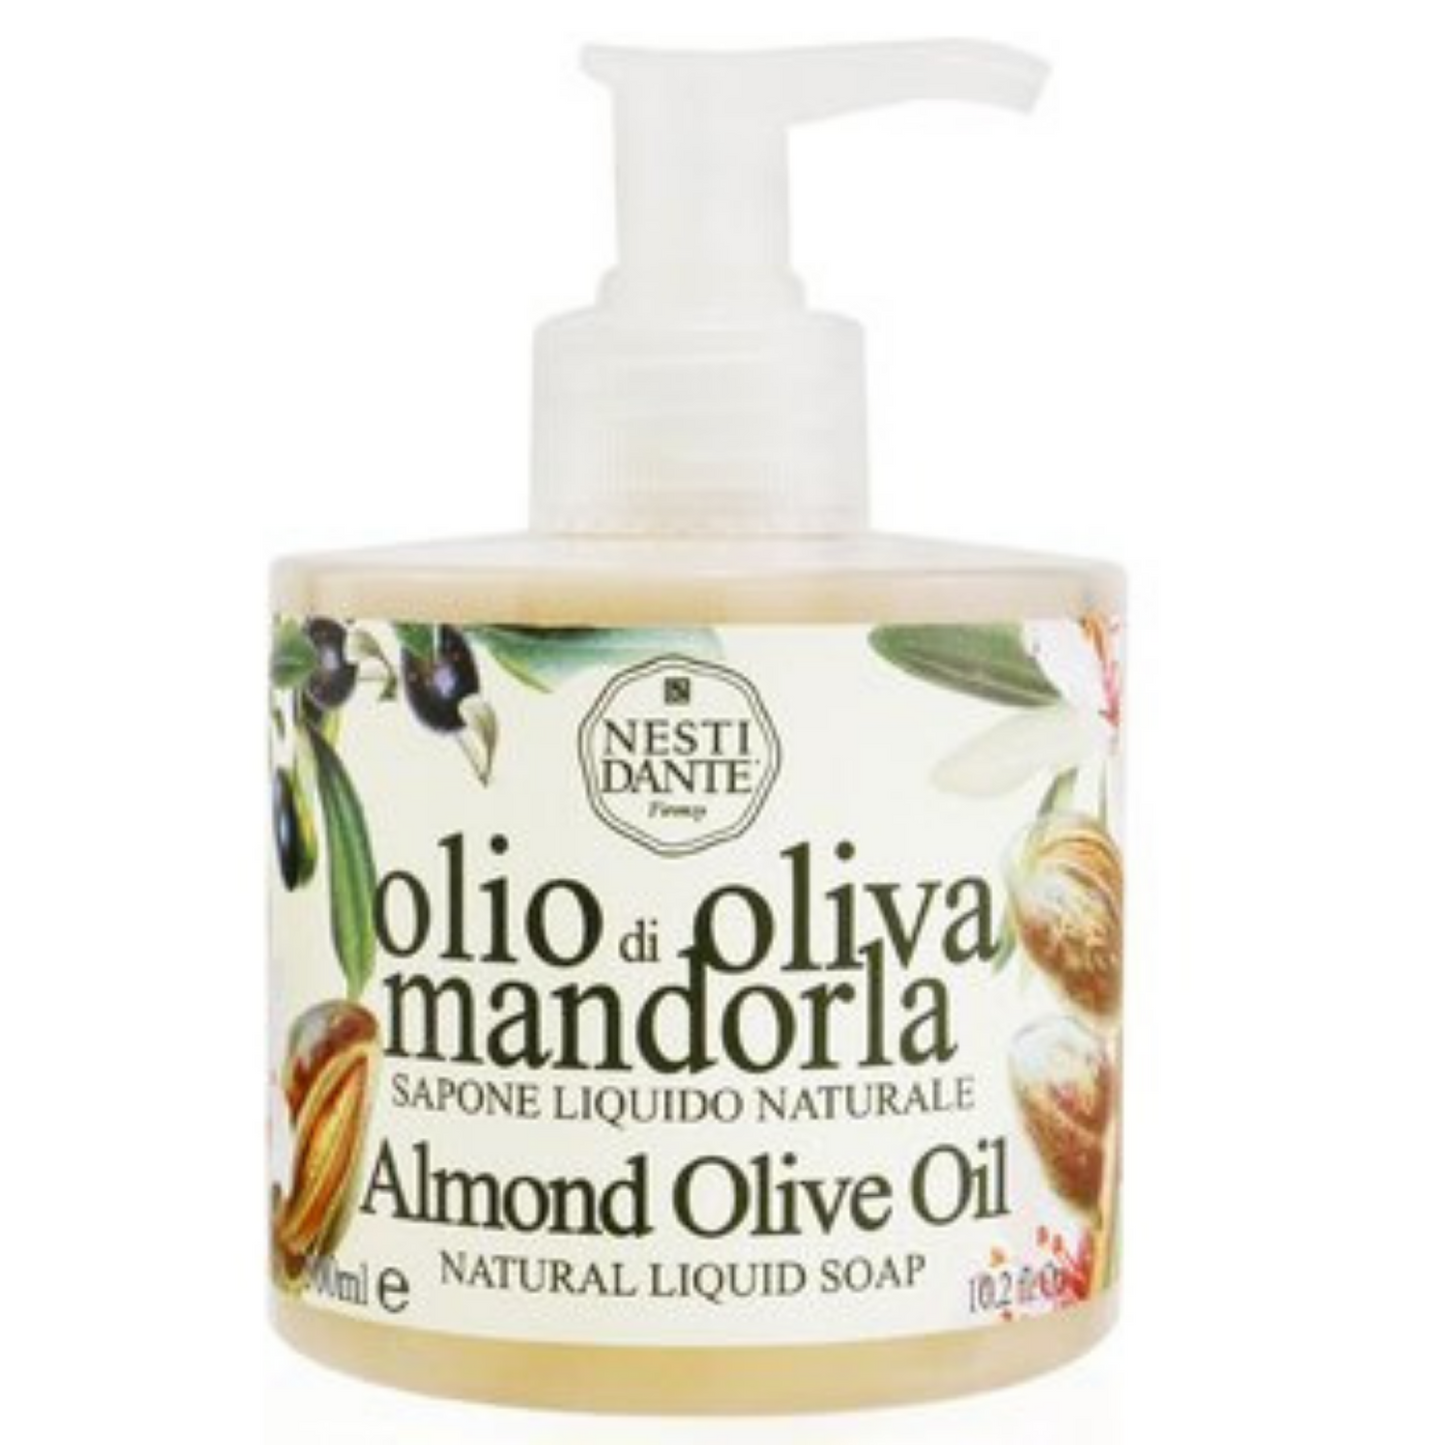 Primary image of Almond Olive Oil Hand Gel Liquid Soap